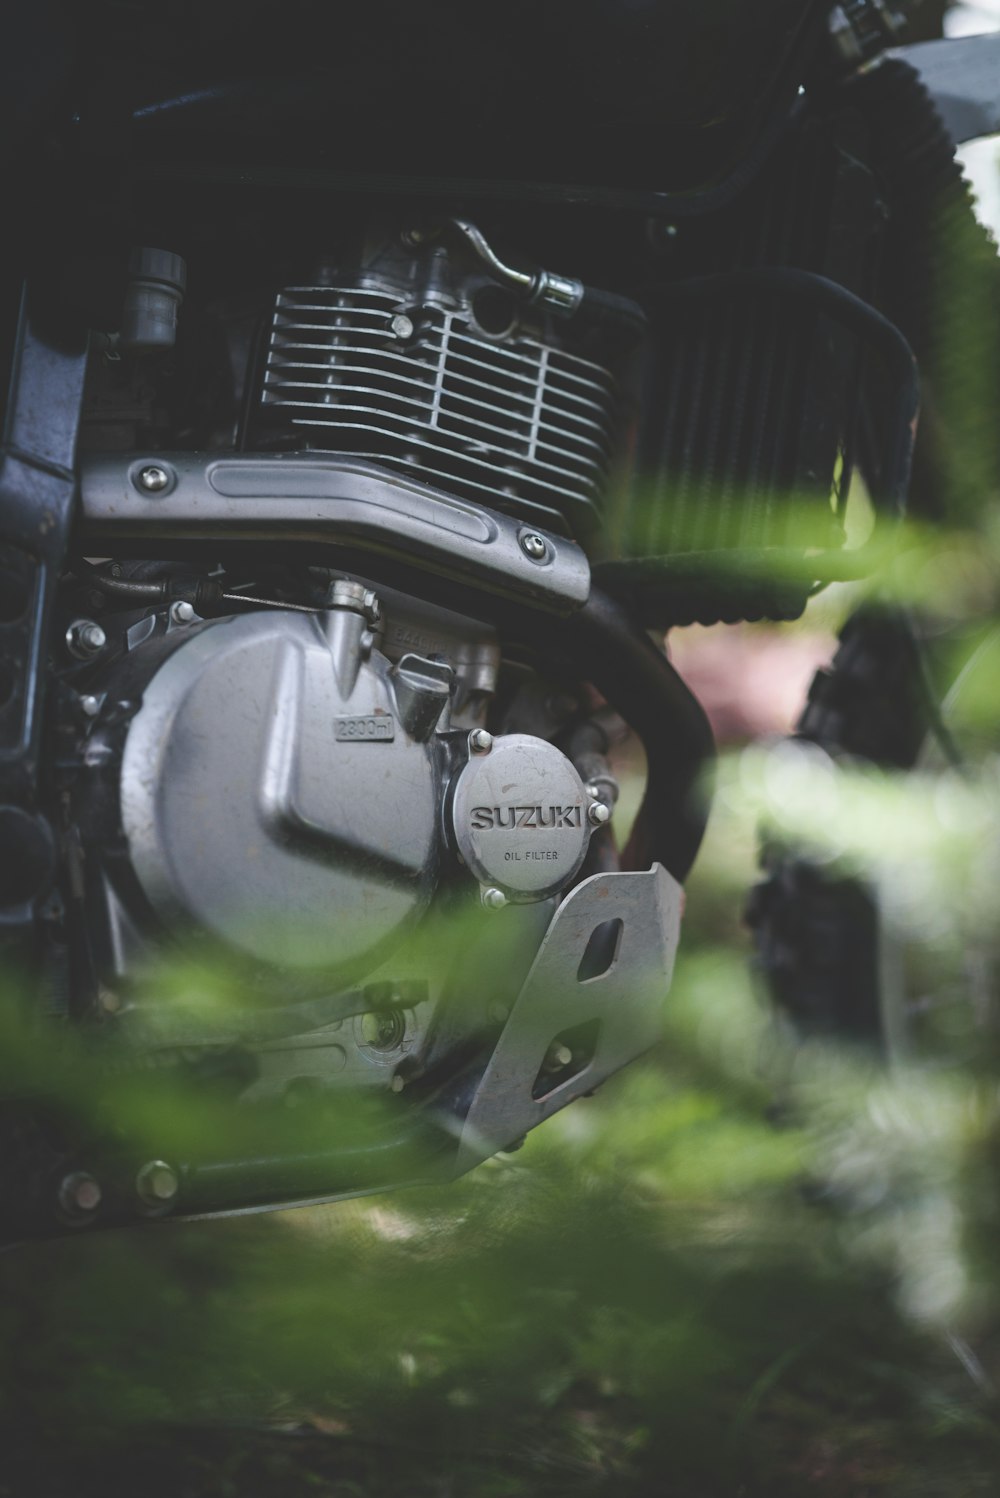 green and black motorcycle engine